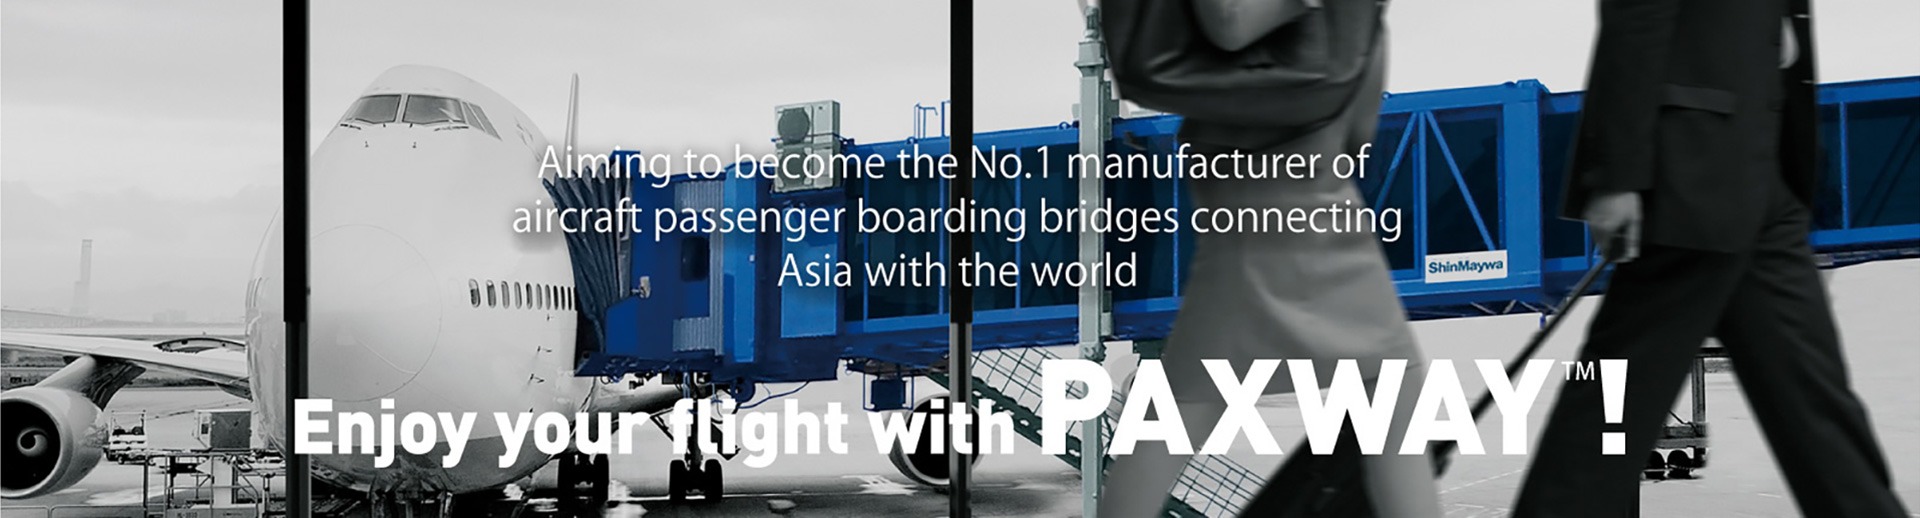 Become the No. 1 boarding bridge manufacturer that serves as a ladder for Asia and the world Enjoy your flight with PAXWAY®!